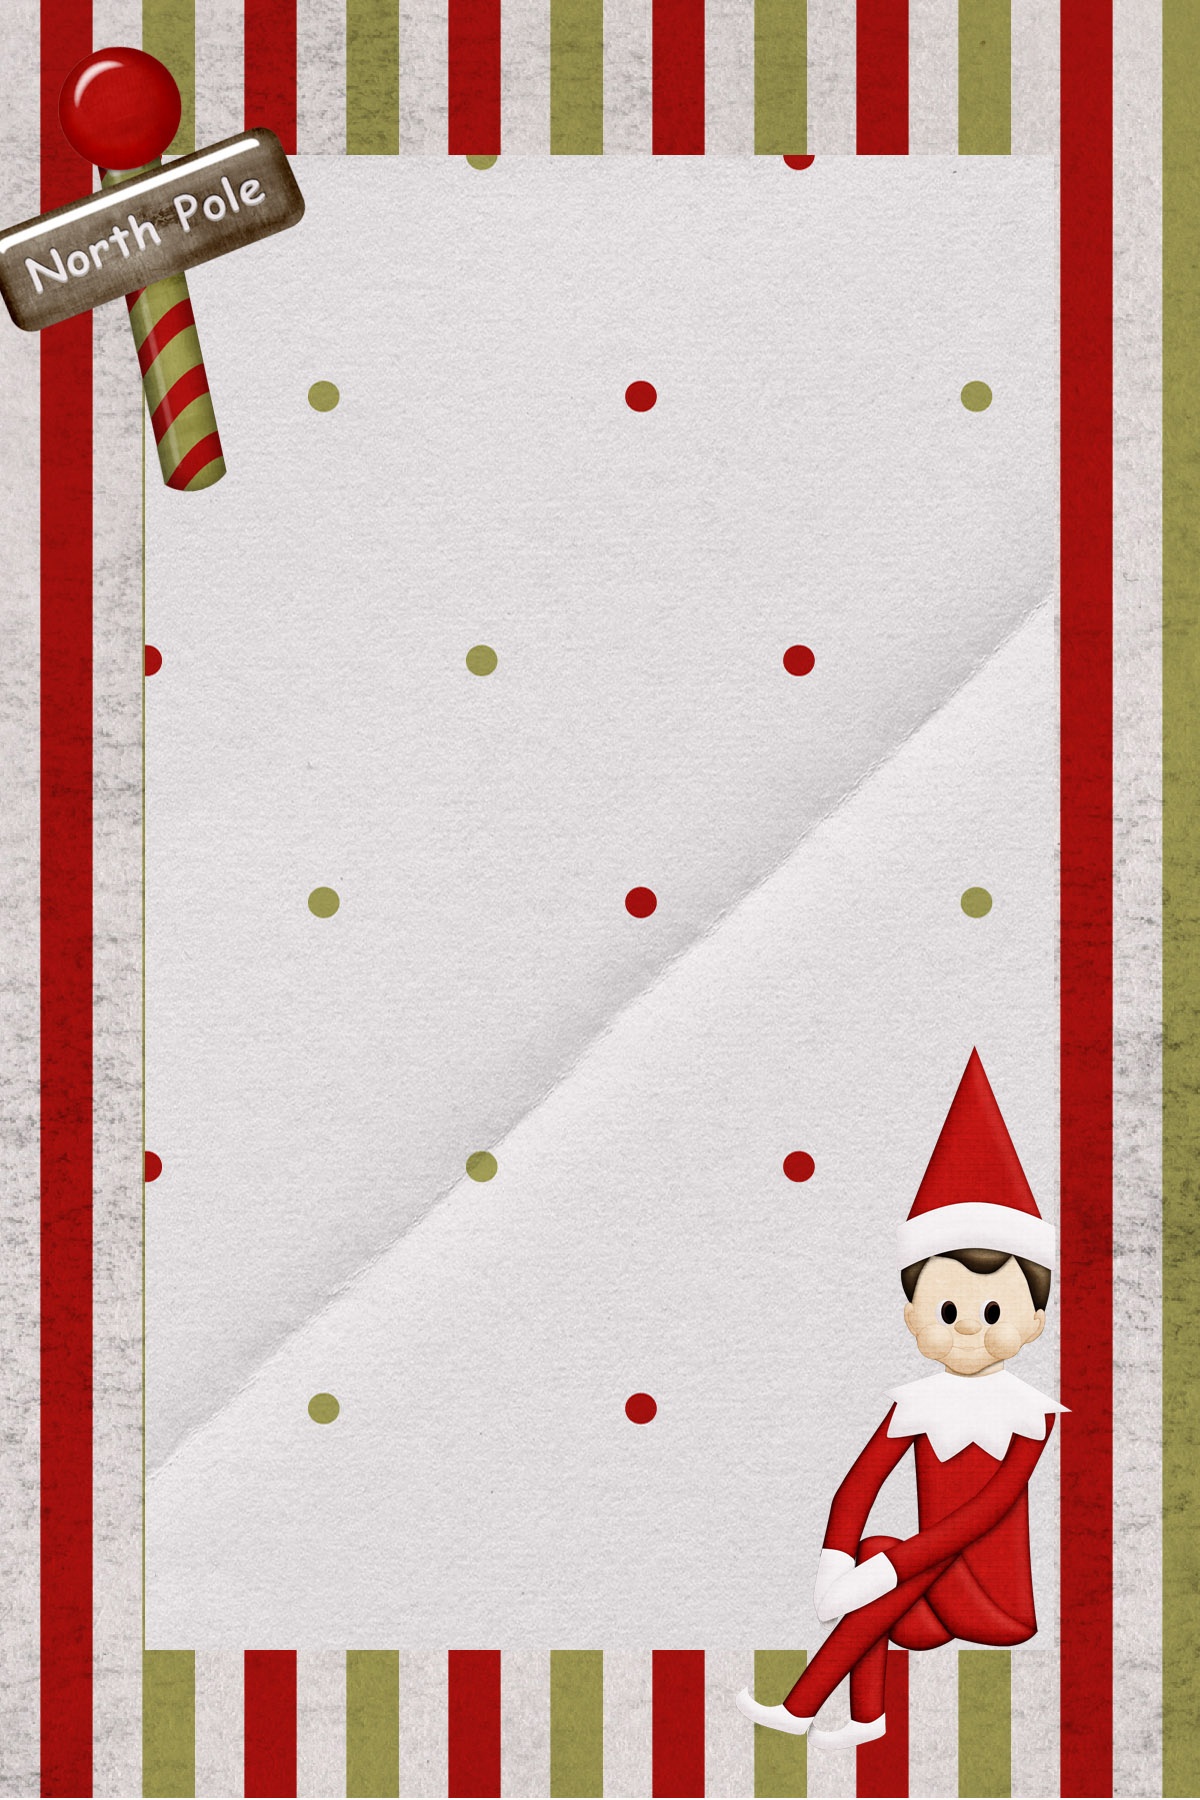 Super Cute Free Downloadable Elf On The Shelf Note. Customize - Free Printable Elf Stationery